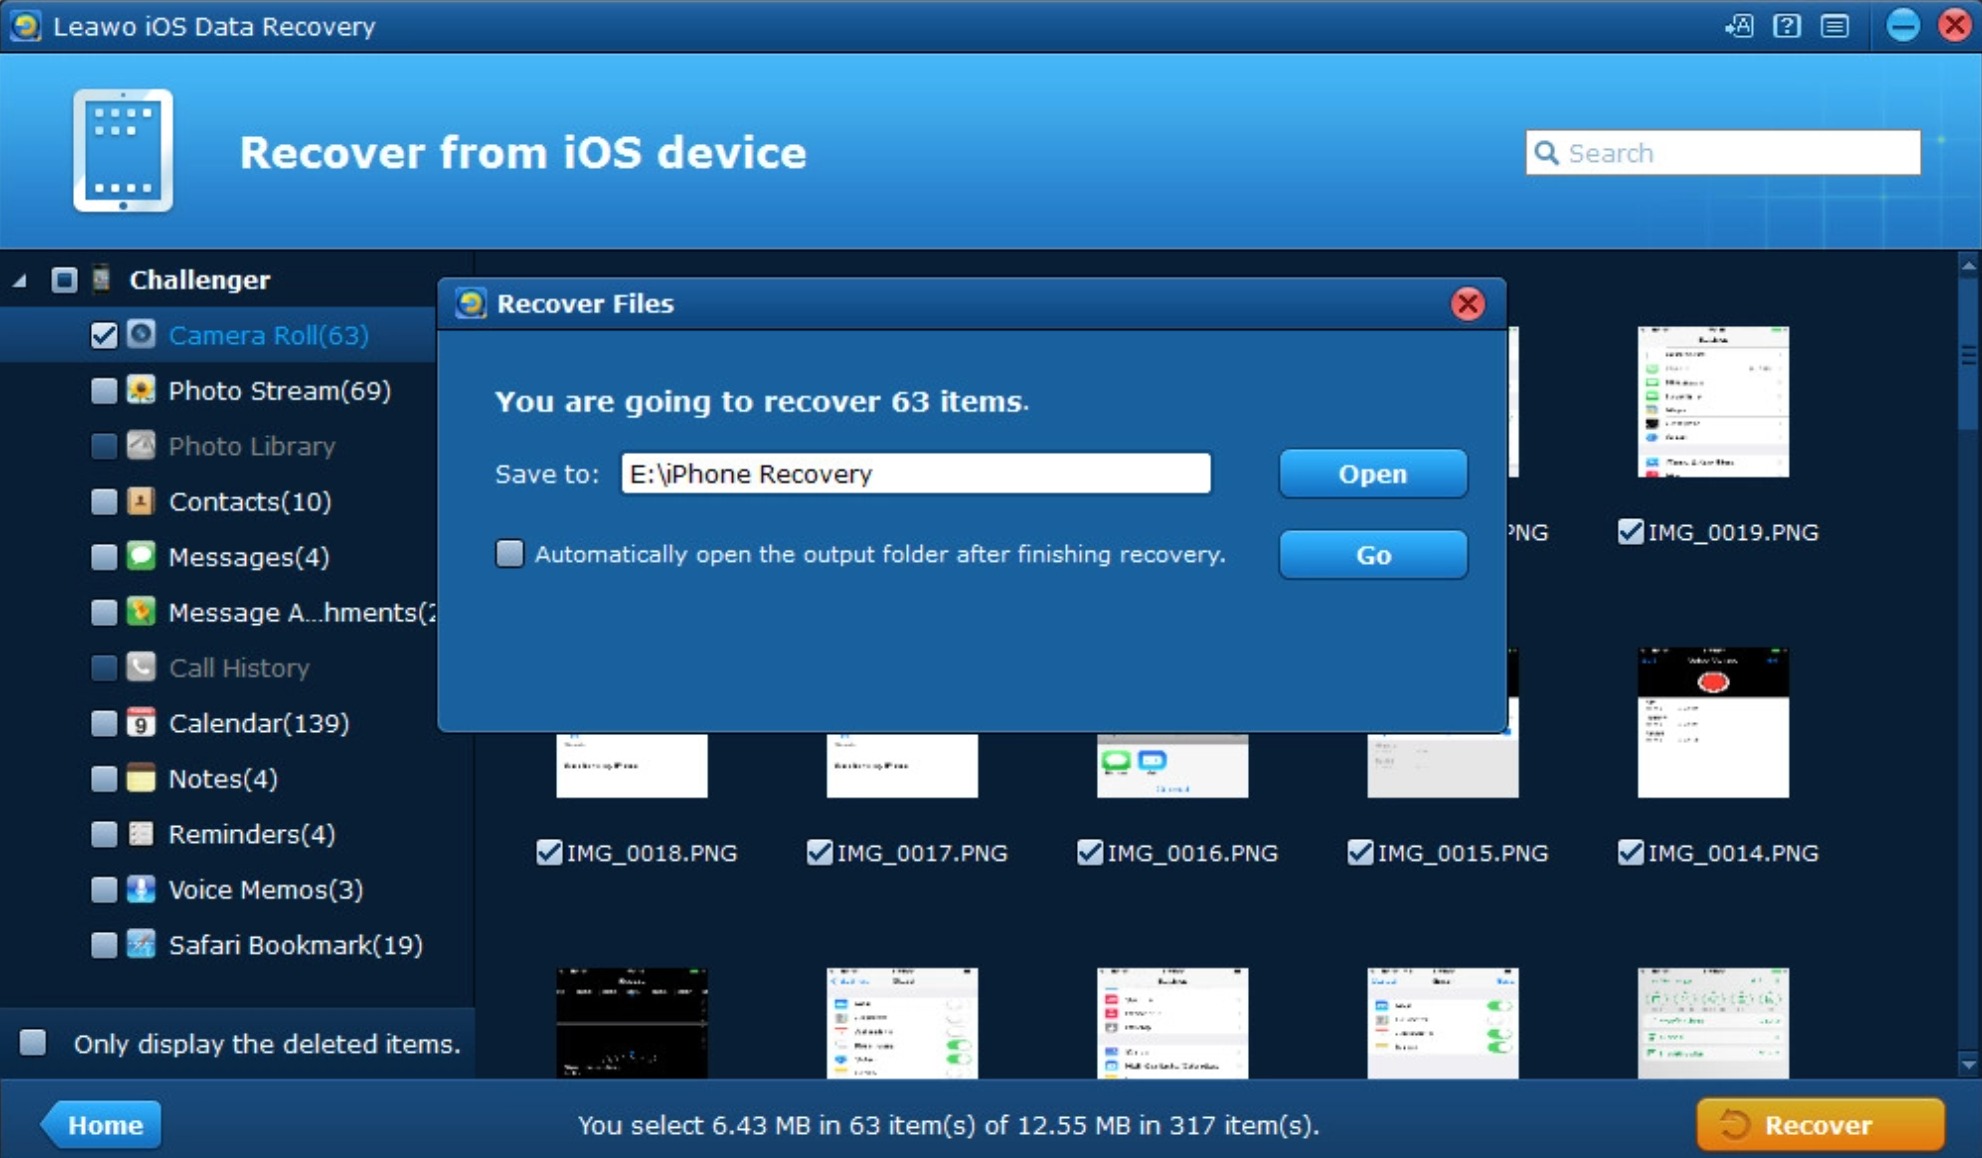 recover-deleted-photos-on-iPad-without-backup 04